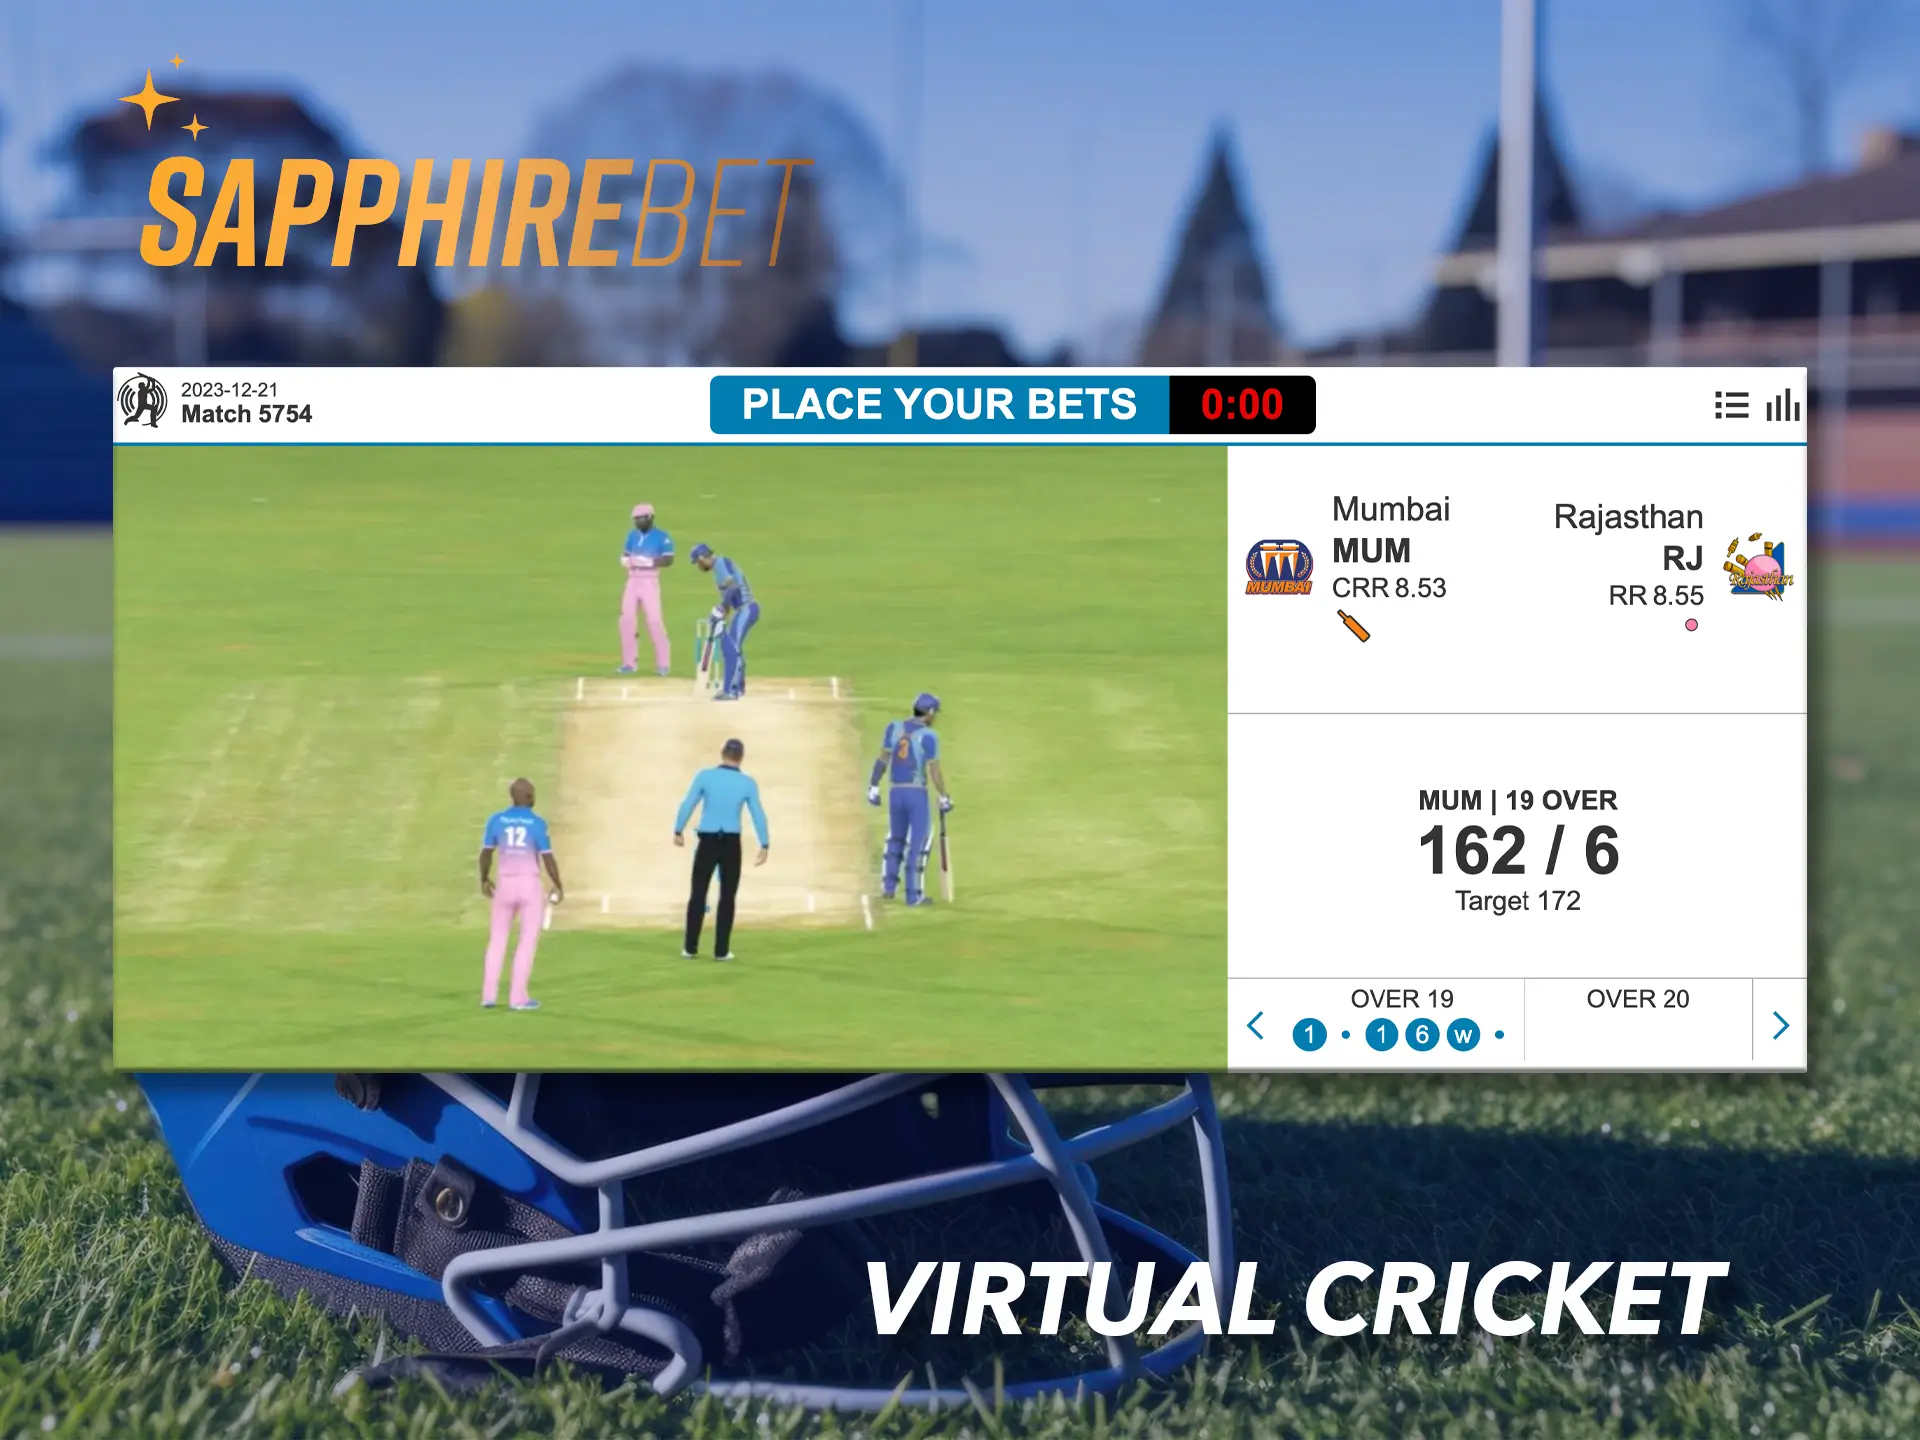 At Sapphirebet, you can watch virtual cricket which is virtually the same as the real thing.